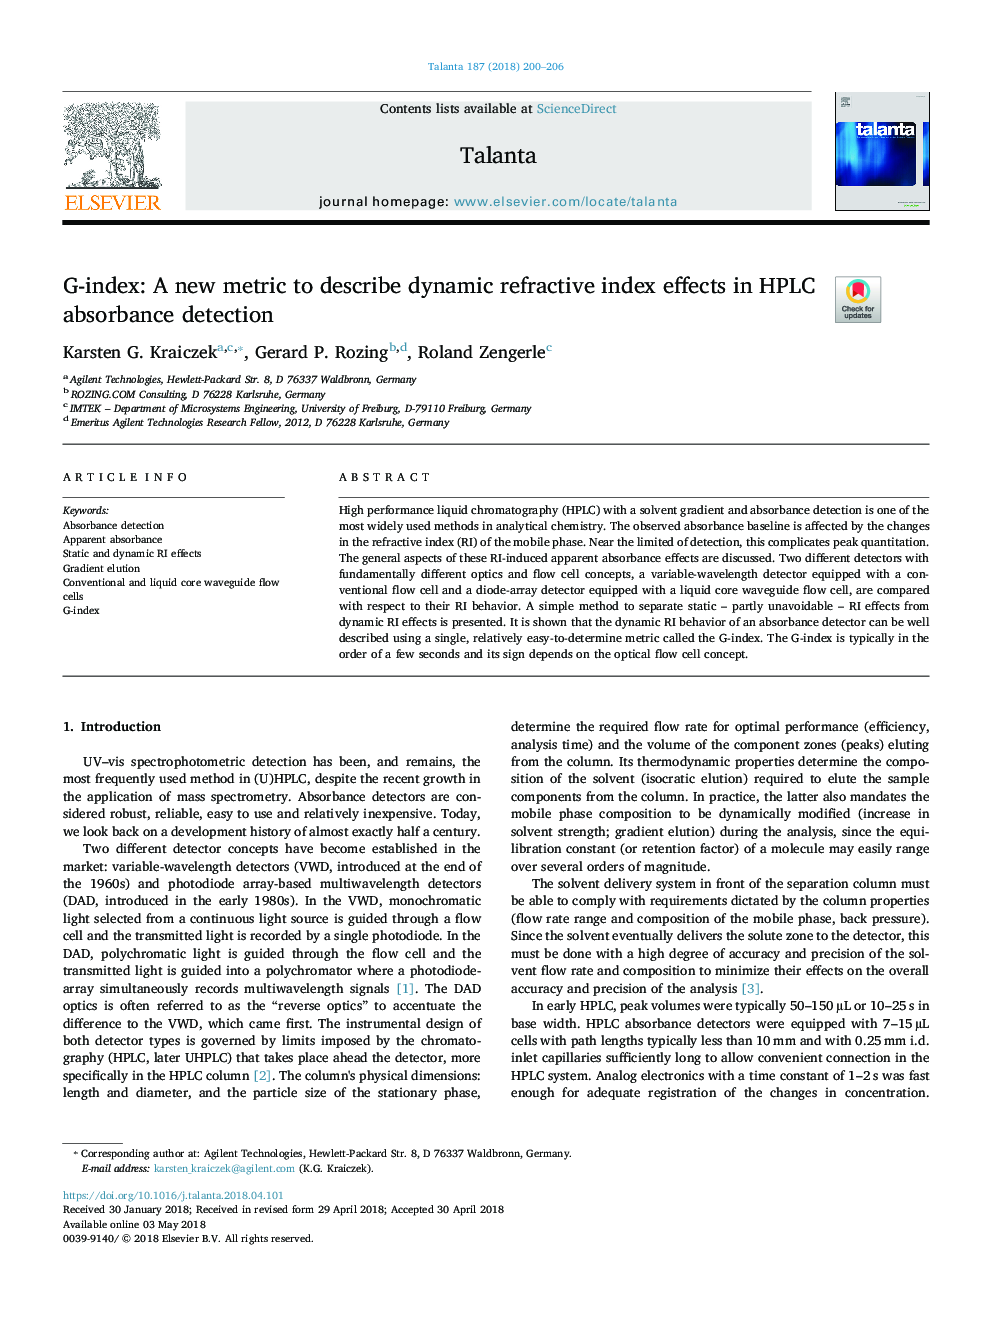 G-index: A new metric to describe dynamic refractive index effects in HPLC absorbance detection